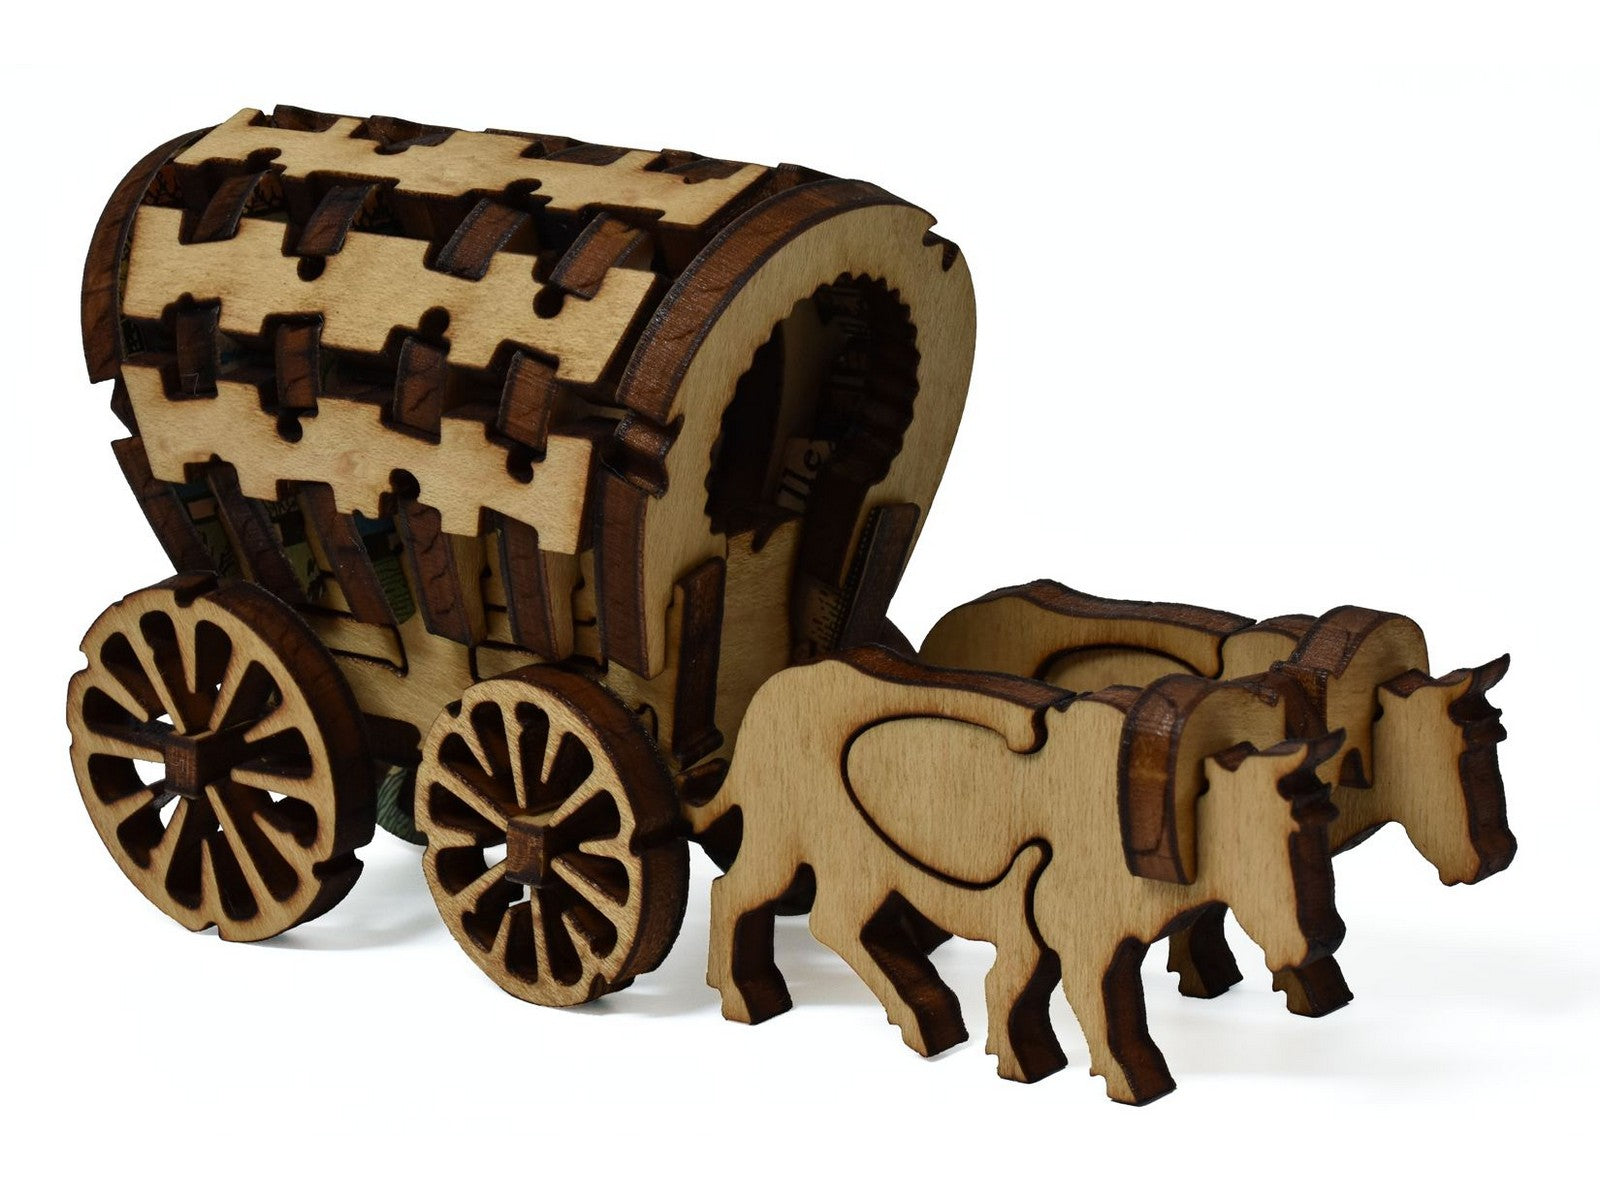 A closeup of pieces showing a three dimensional wagon being pulled by two oxen.